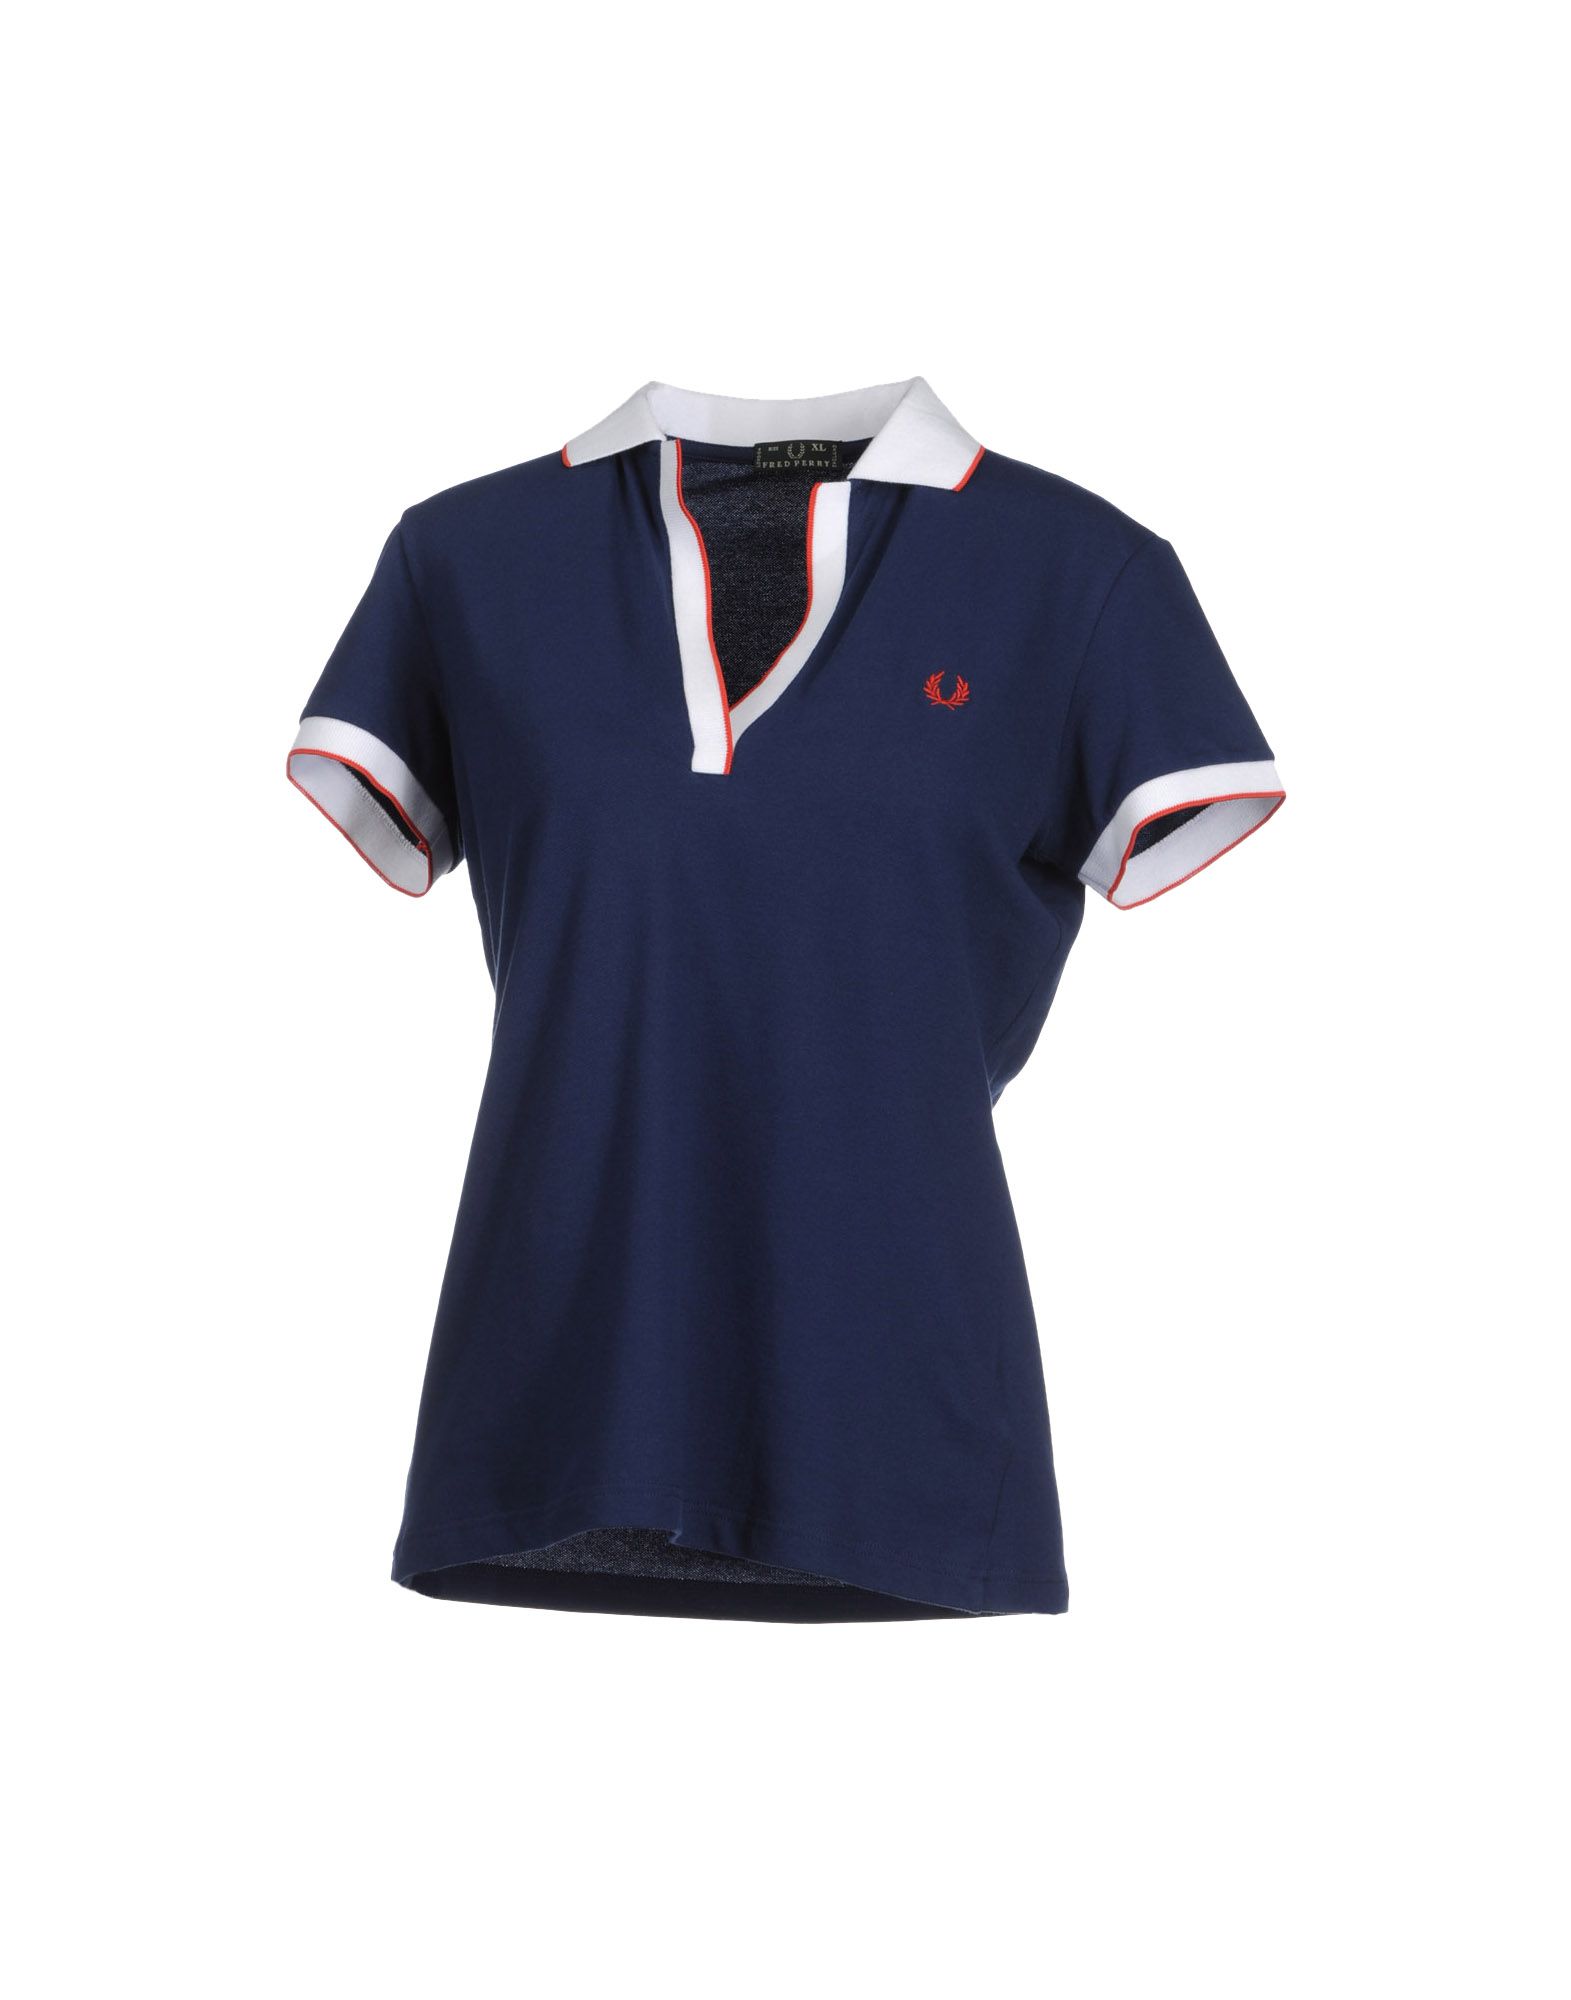 Foto fred perry polos
 foto 289457